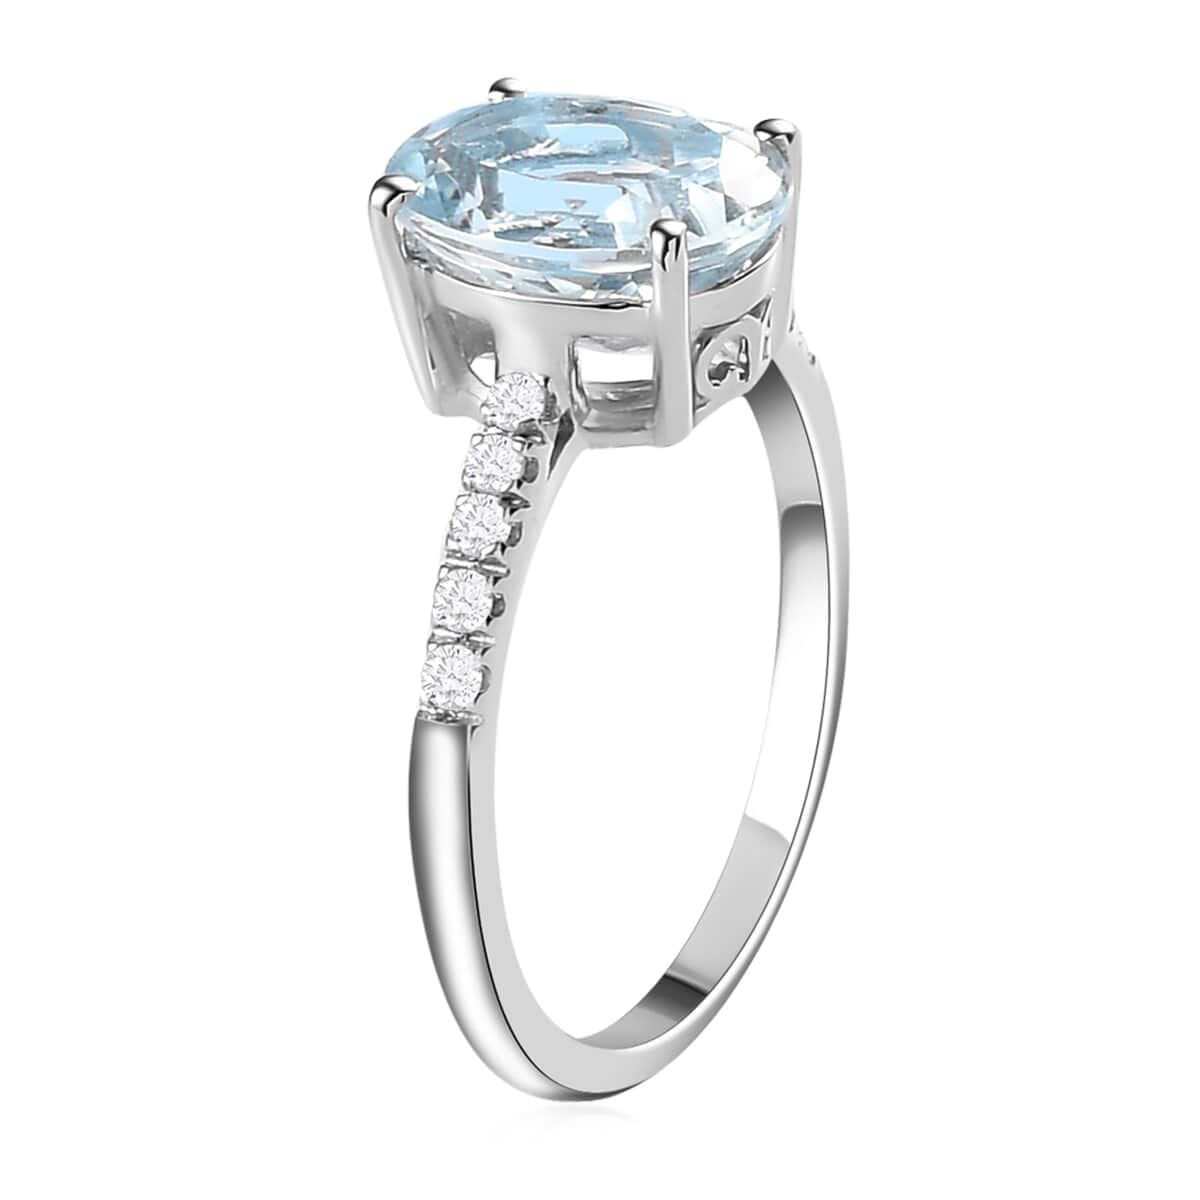 Premium Mangoro Aquamarine, Diamond Ring in Platinum Over Sterling Silver,Promise Rings For Her,Silver Fancy Ring 2.35 ctw (Size 10.0) image number 3